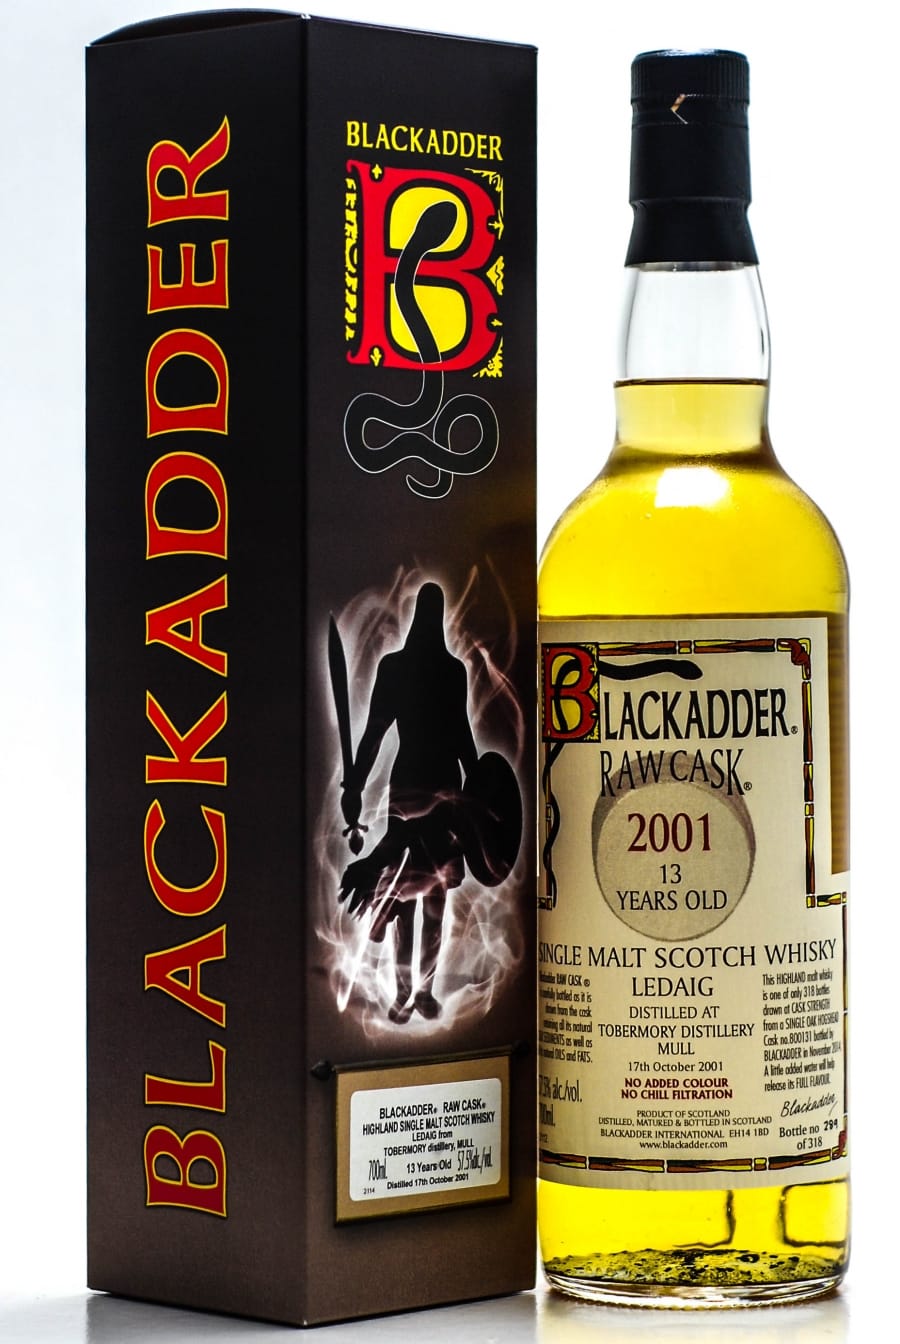 Ledaig - 13 Years Old Blackadder Raw Cask:800131 57.5% 2001 In Original Container